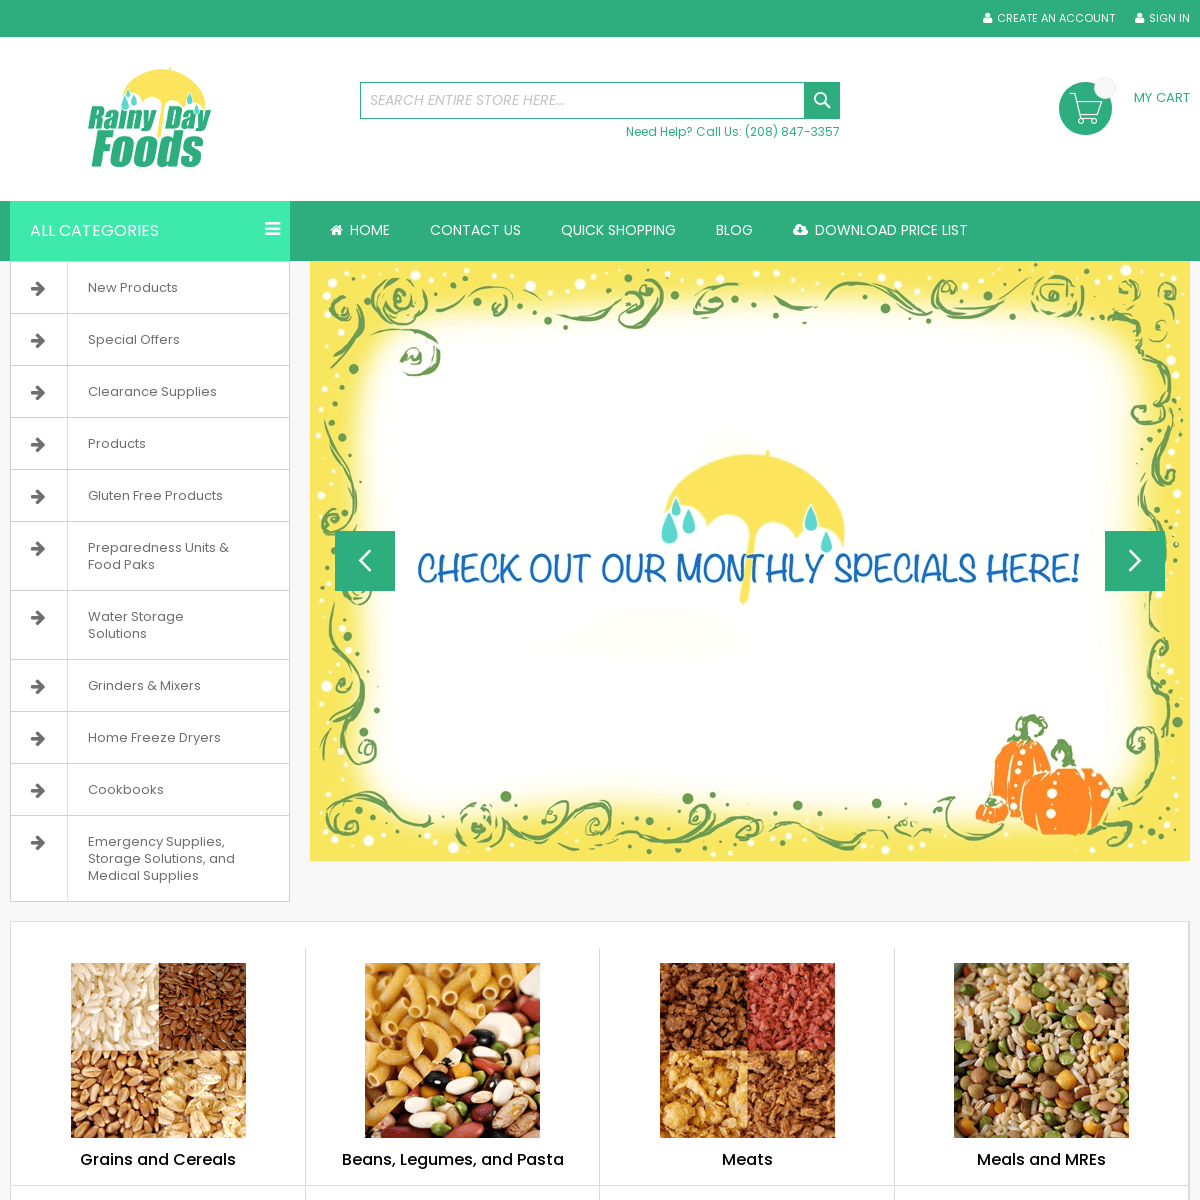 A complete backup of https://rainydayfoods.com